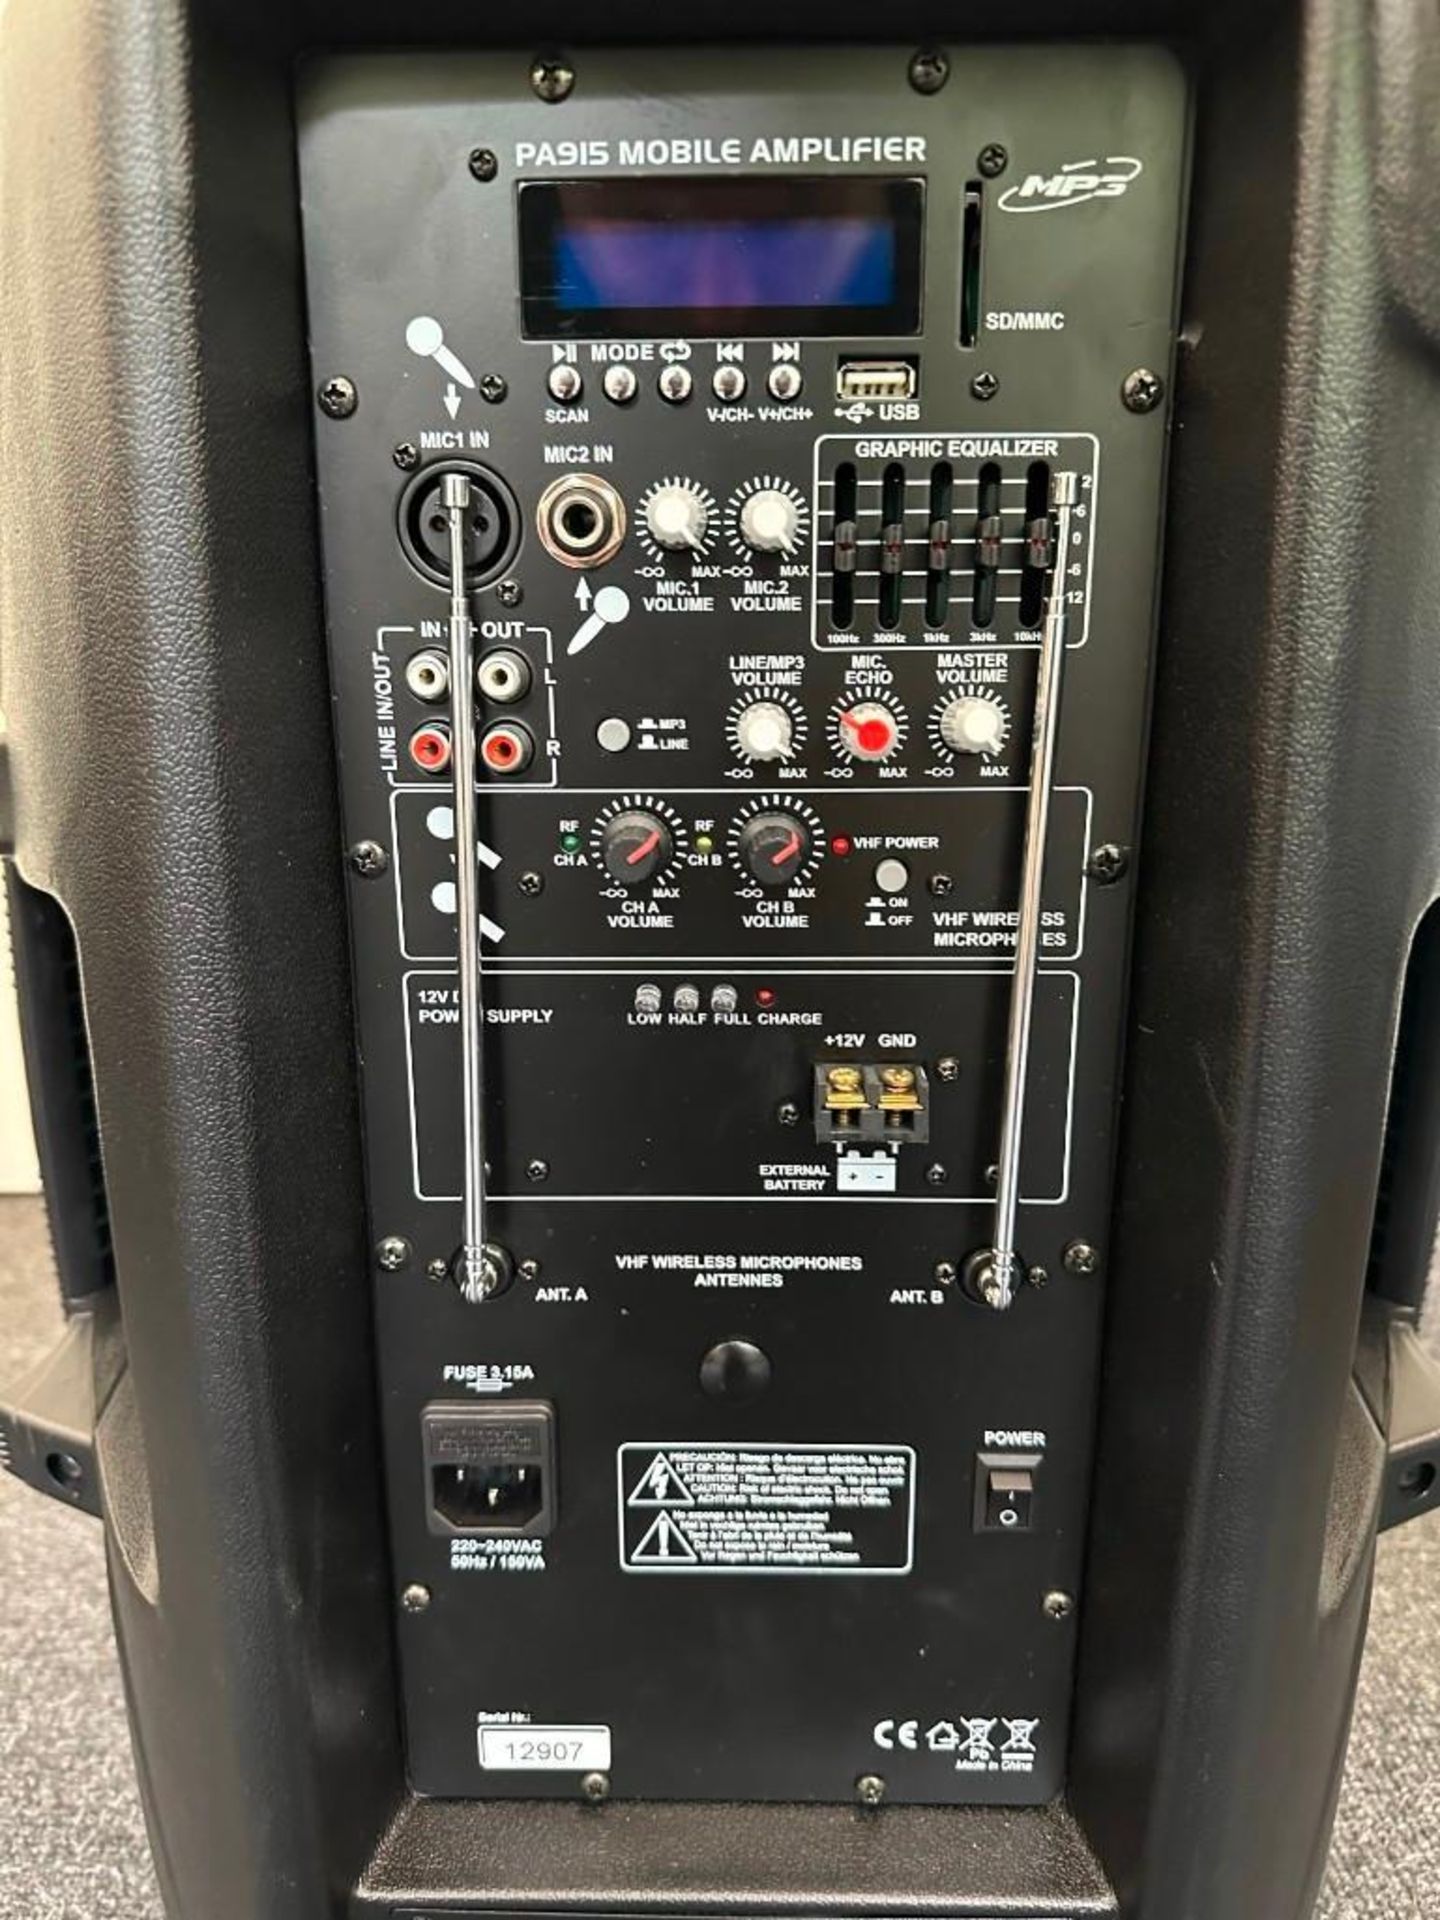 Skytec SPL-PA 915 mobile amplifier complete with microphone, single phase - Image 2 of 3